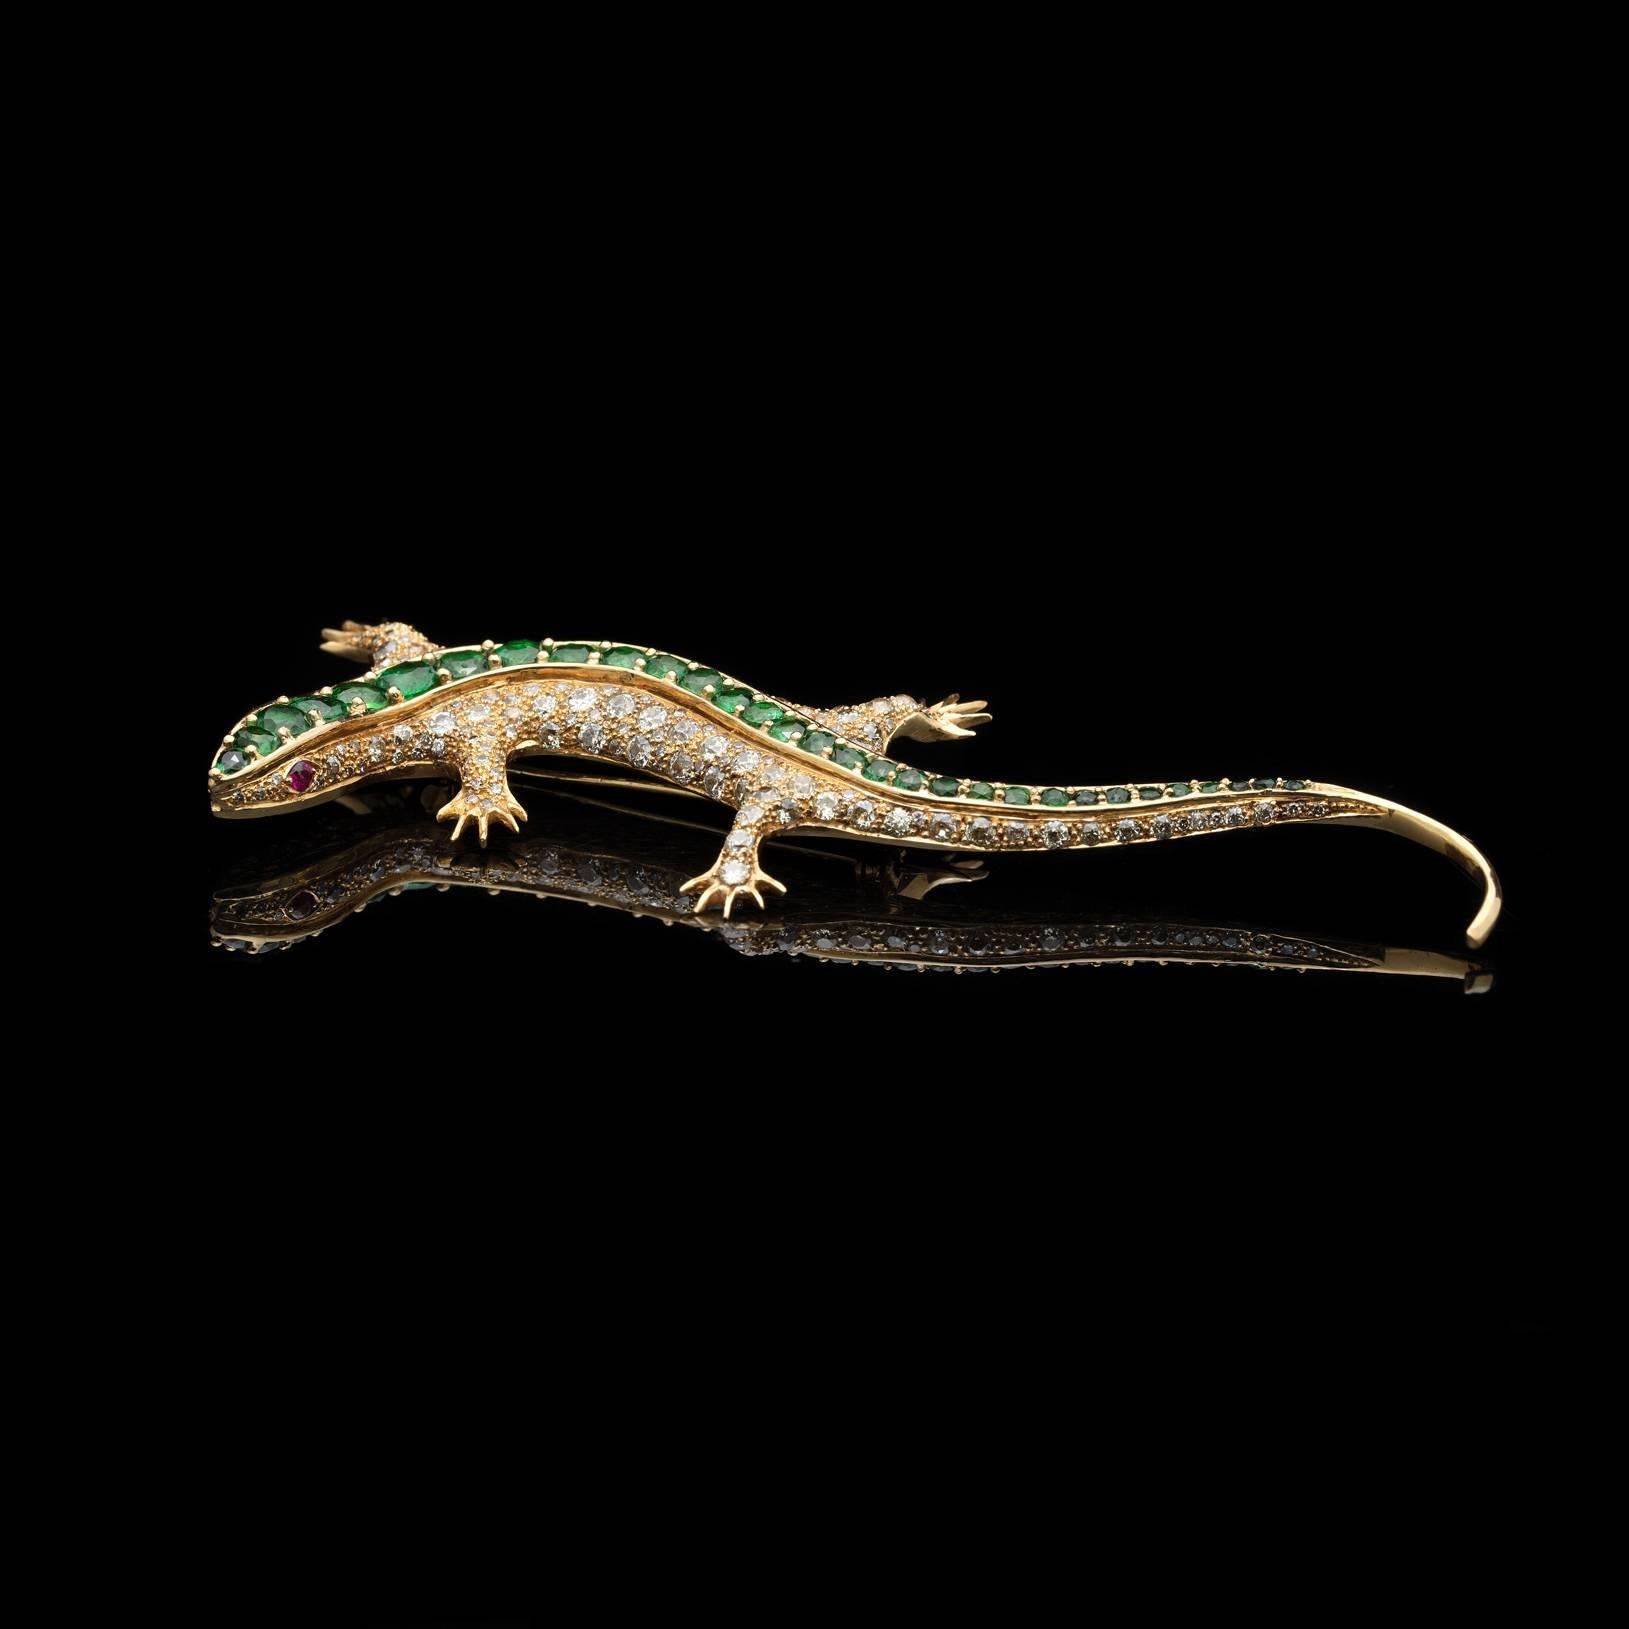 Fabulous 18k gold oversize salamander brooch, set with 188 European and single-cut diamonds which weigh in total approximately 4.00cts, the spine set with a line of oval and round bright and lively green tsavorite garnets weighing in total